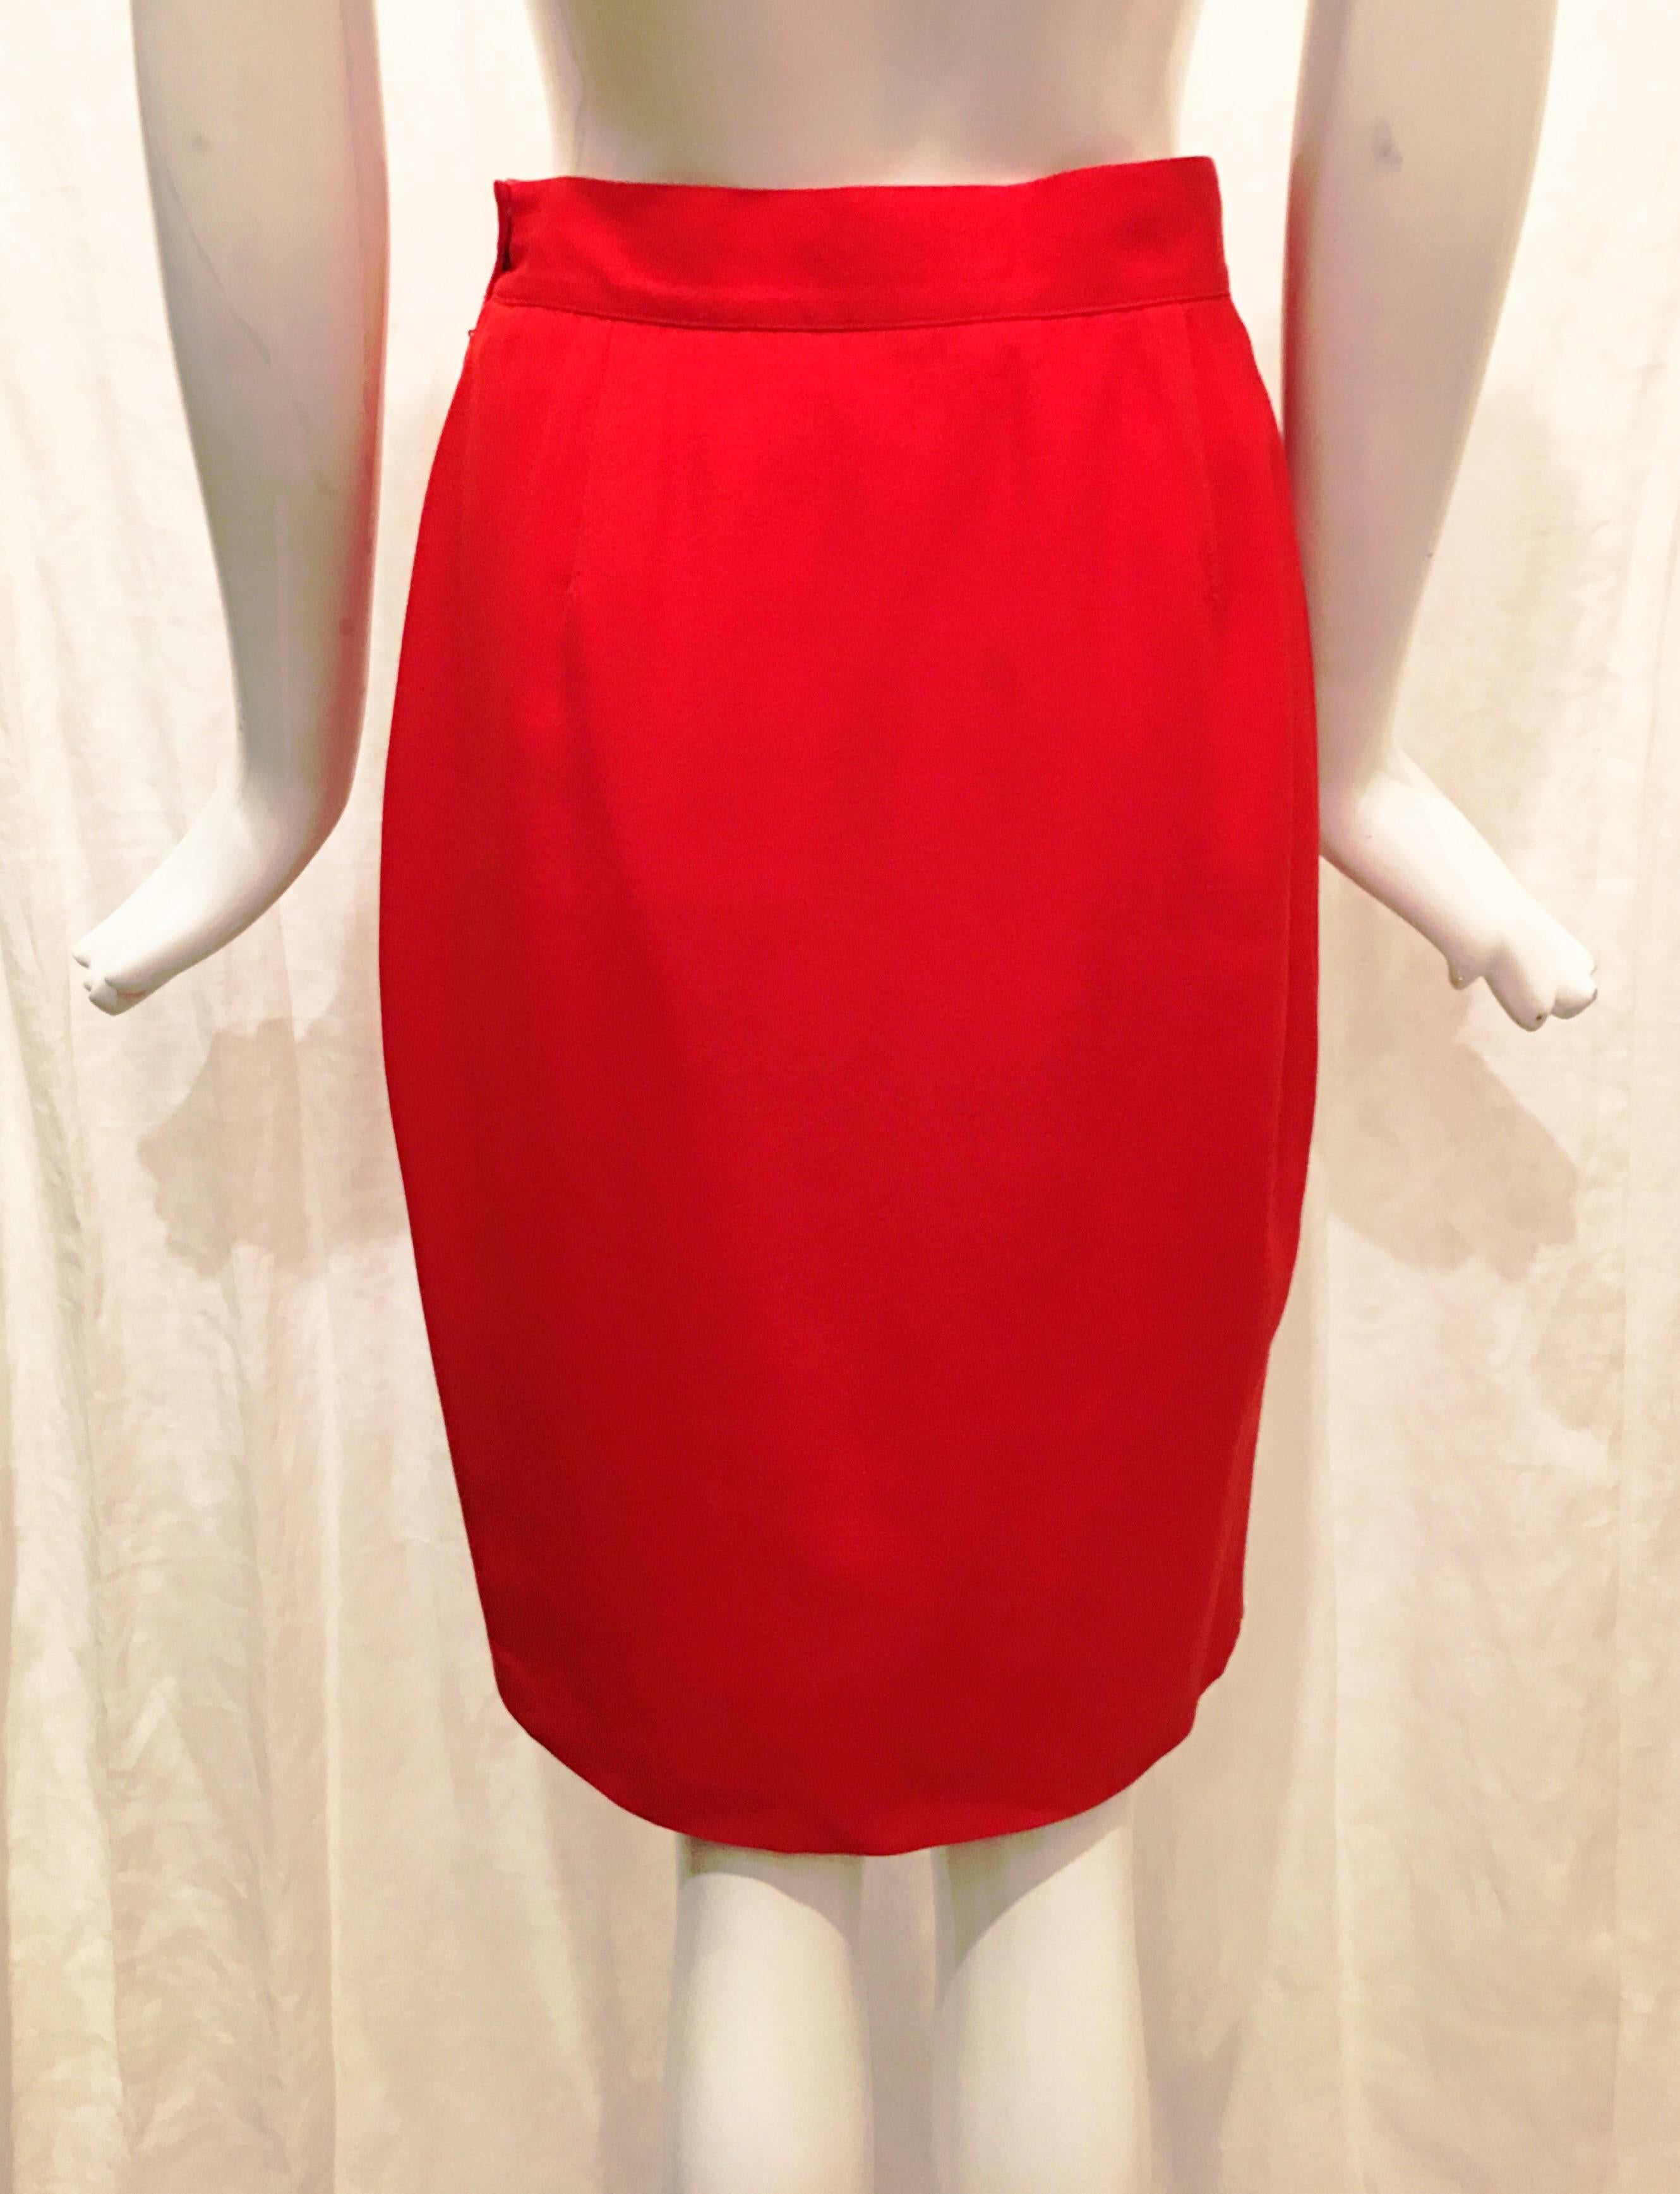 Thierry Mugler Red Suit Skirt  In Excellent Condition For Sale In Brooklyn, NY